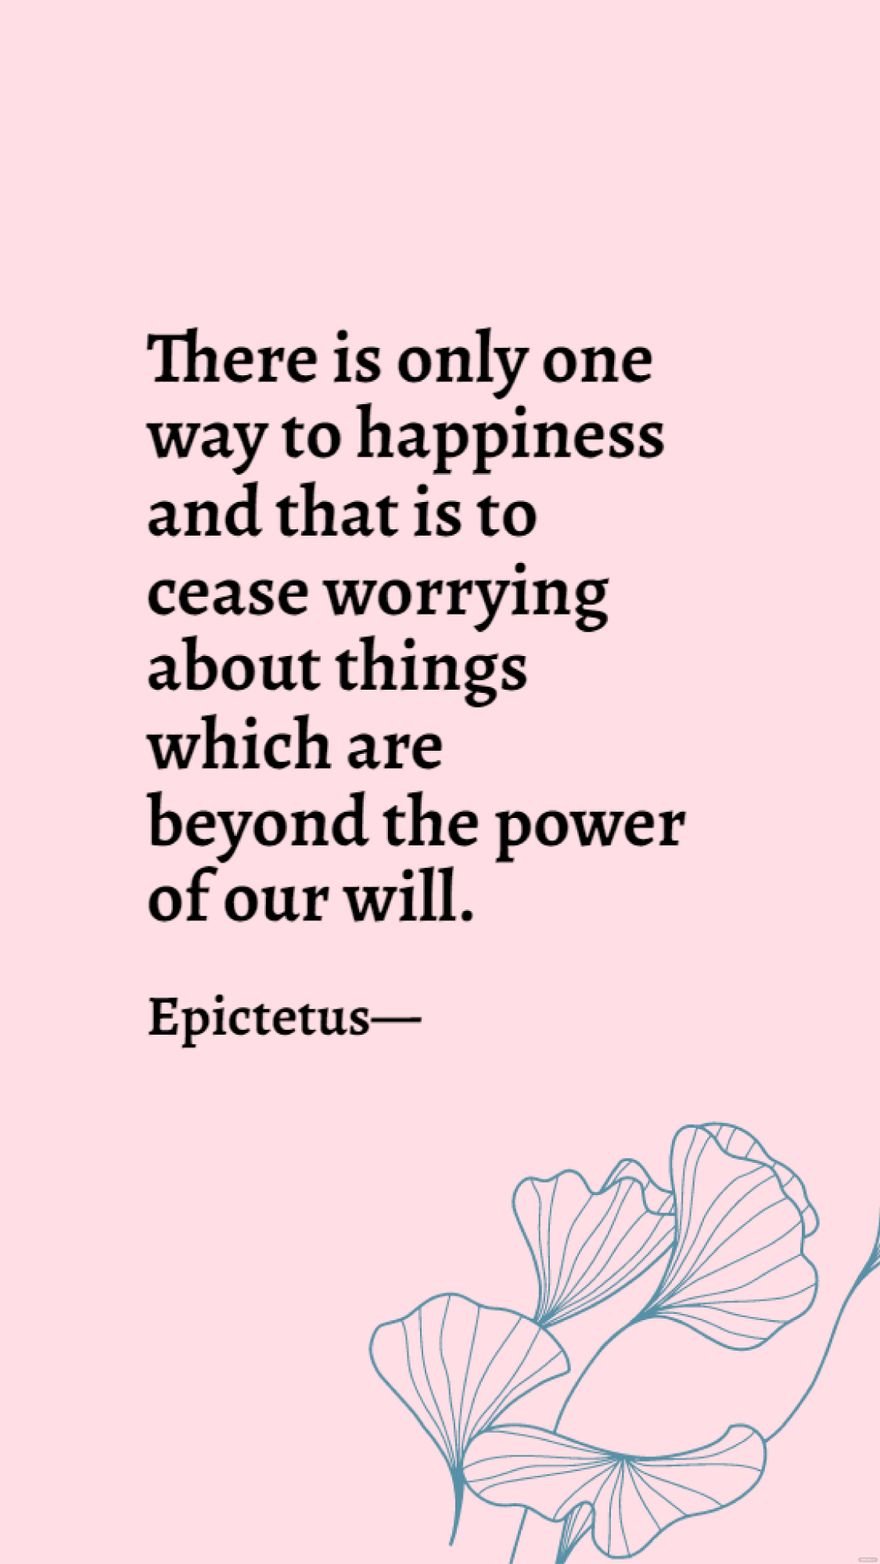 Epictetus - There is only one way to happiness and that is to cease worrying about things which are beyond the power of our will.